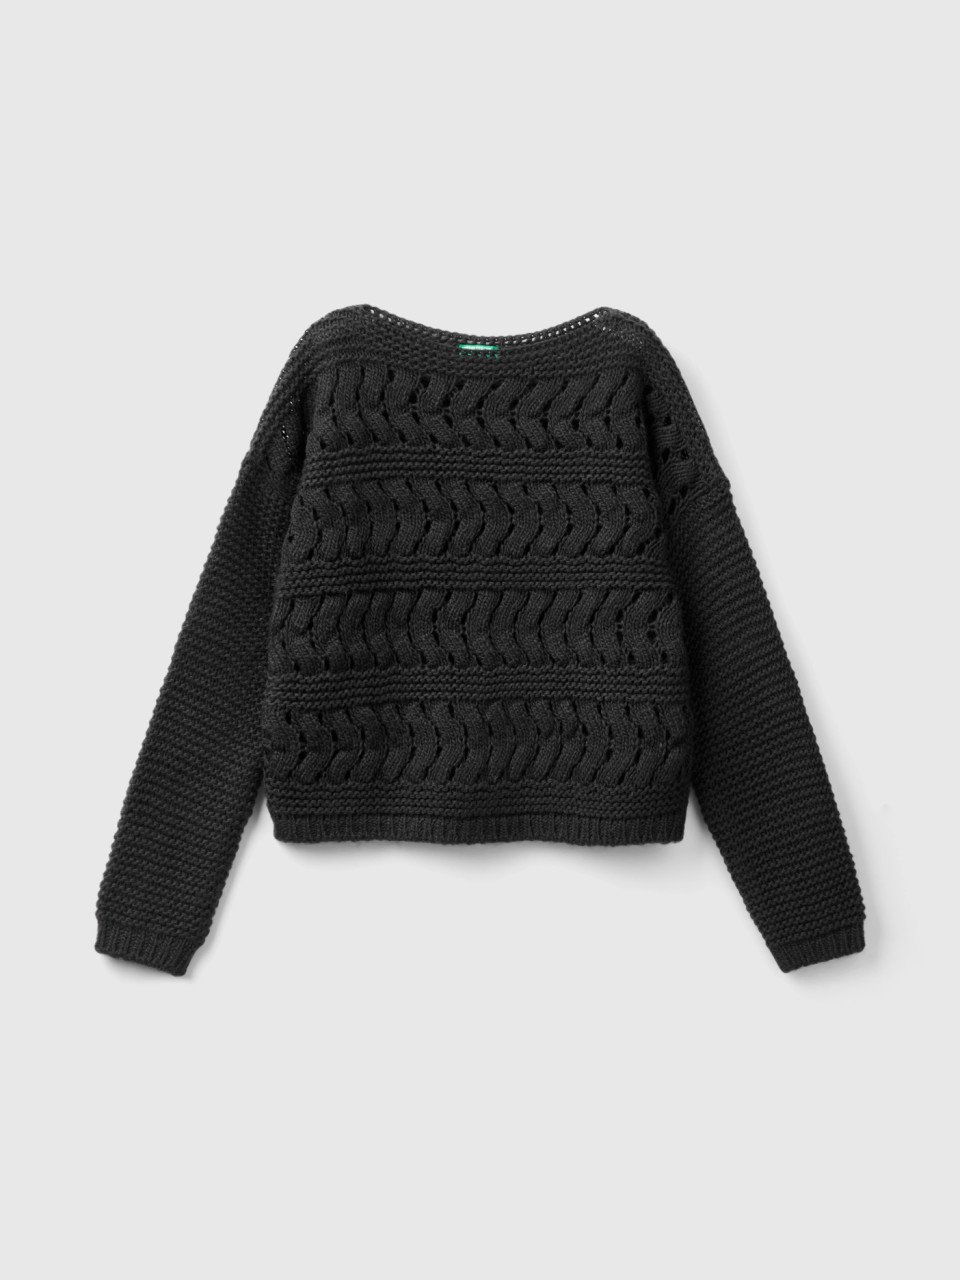 Benetton, Cable Knit Sweater In Wool Blend, Black, Kids